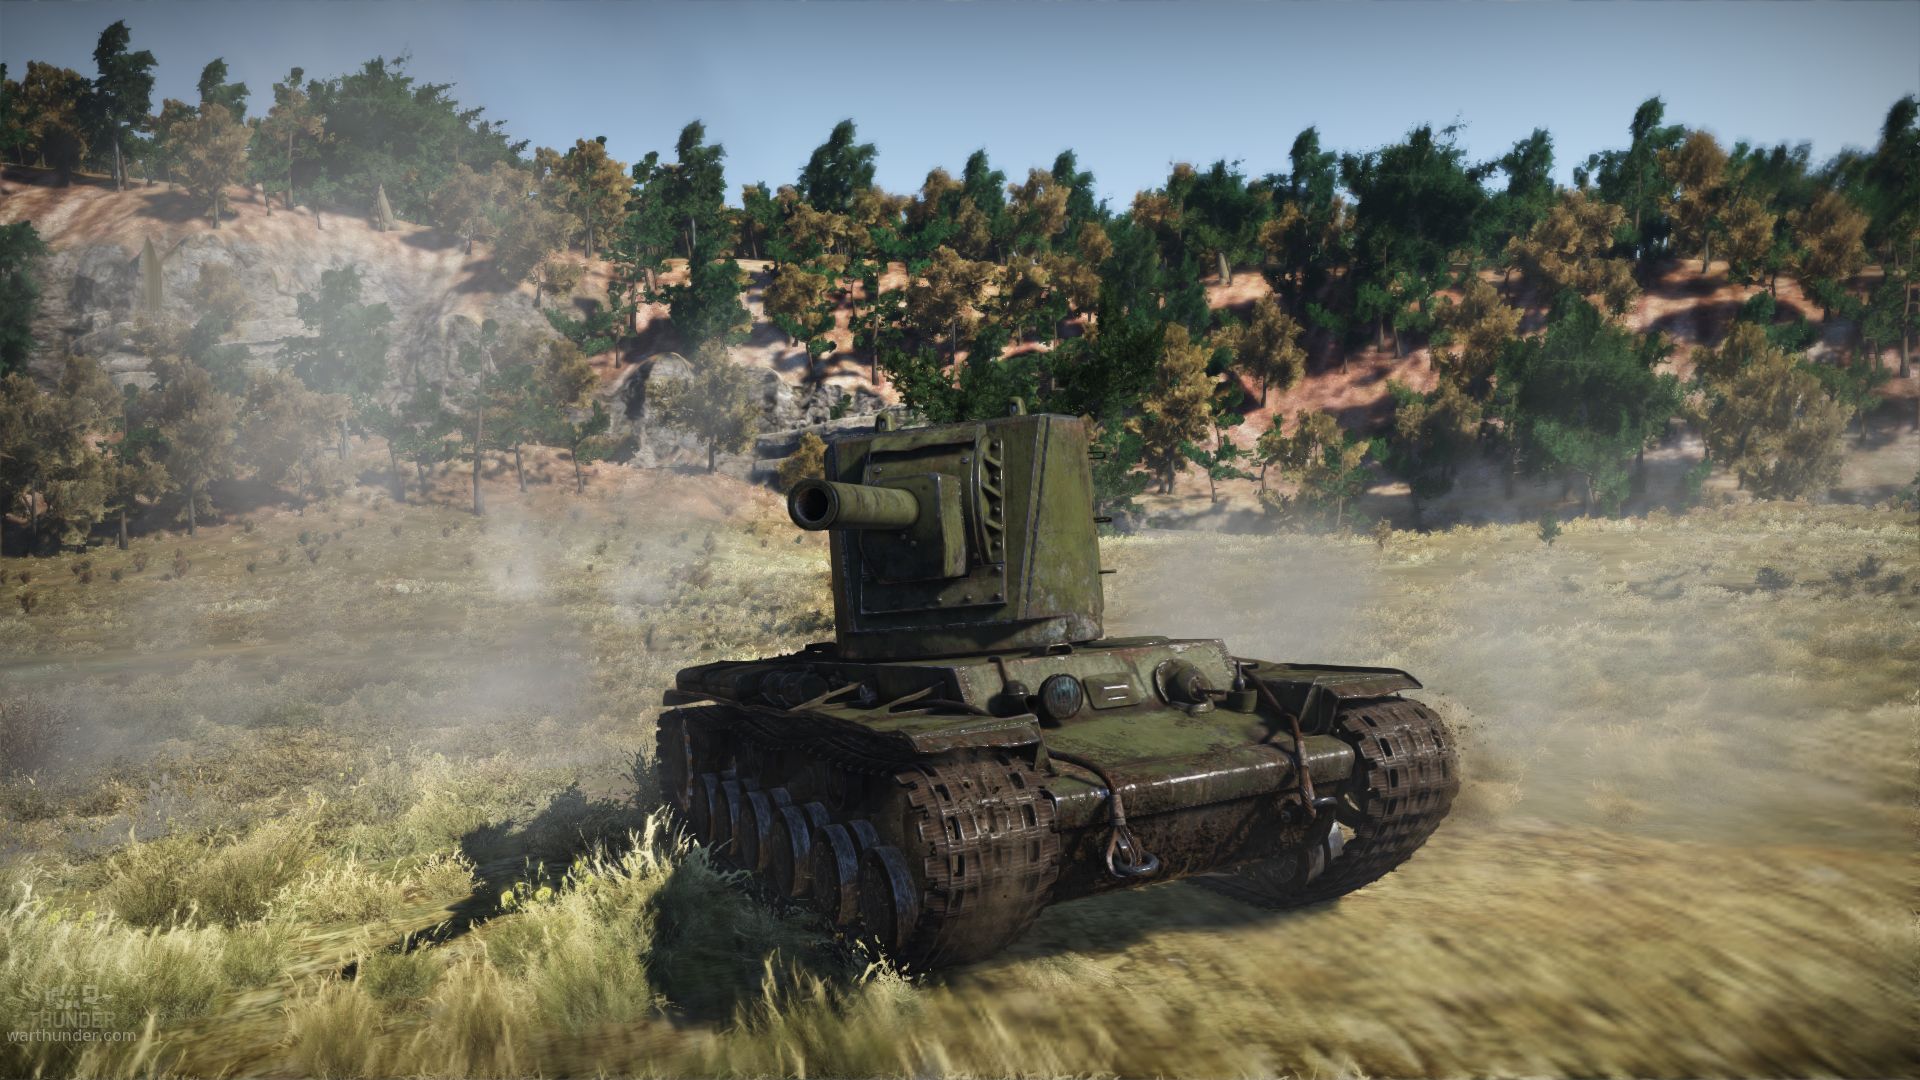 Levelling up your tank crew adds multiple gameplay layers, bringing you back for more.